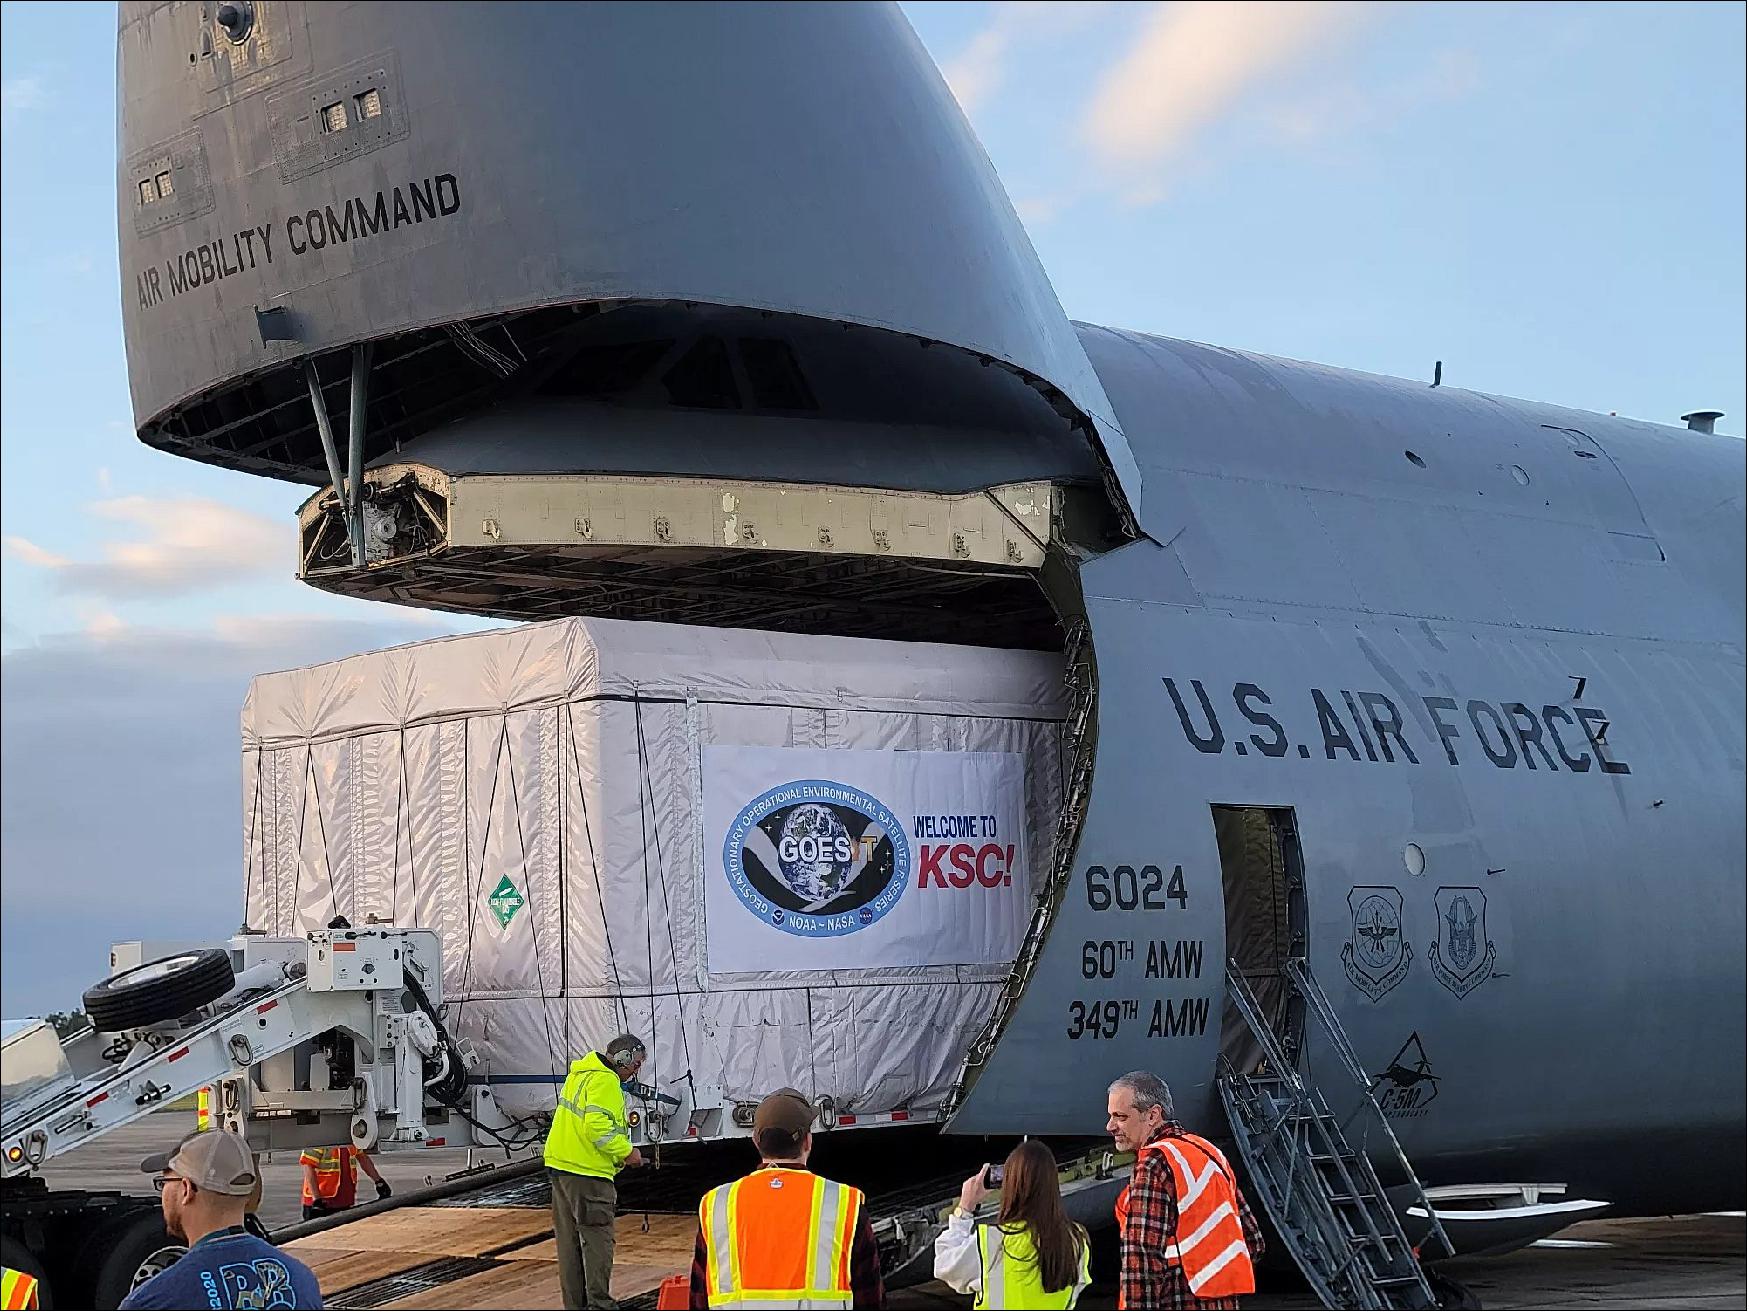 Figure 9: The GOES-T satellite is being unloaded from the C-5 Super Galaxy cargo jet that flew it to the Kennedy Space Center in Florida on Nov. 10, 2021 (image credit: Dan Lindsey)